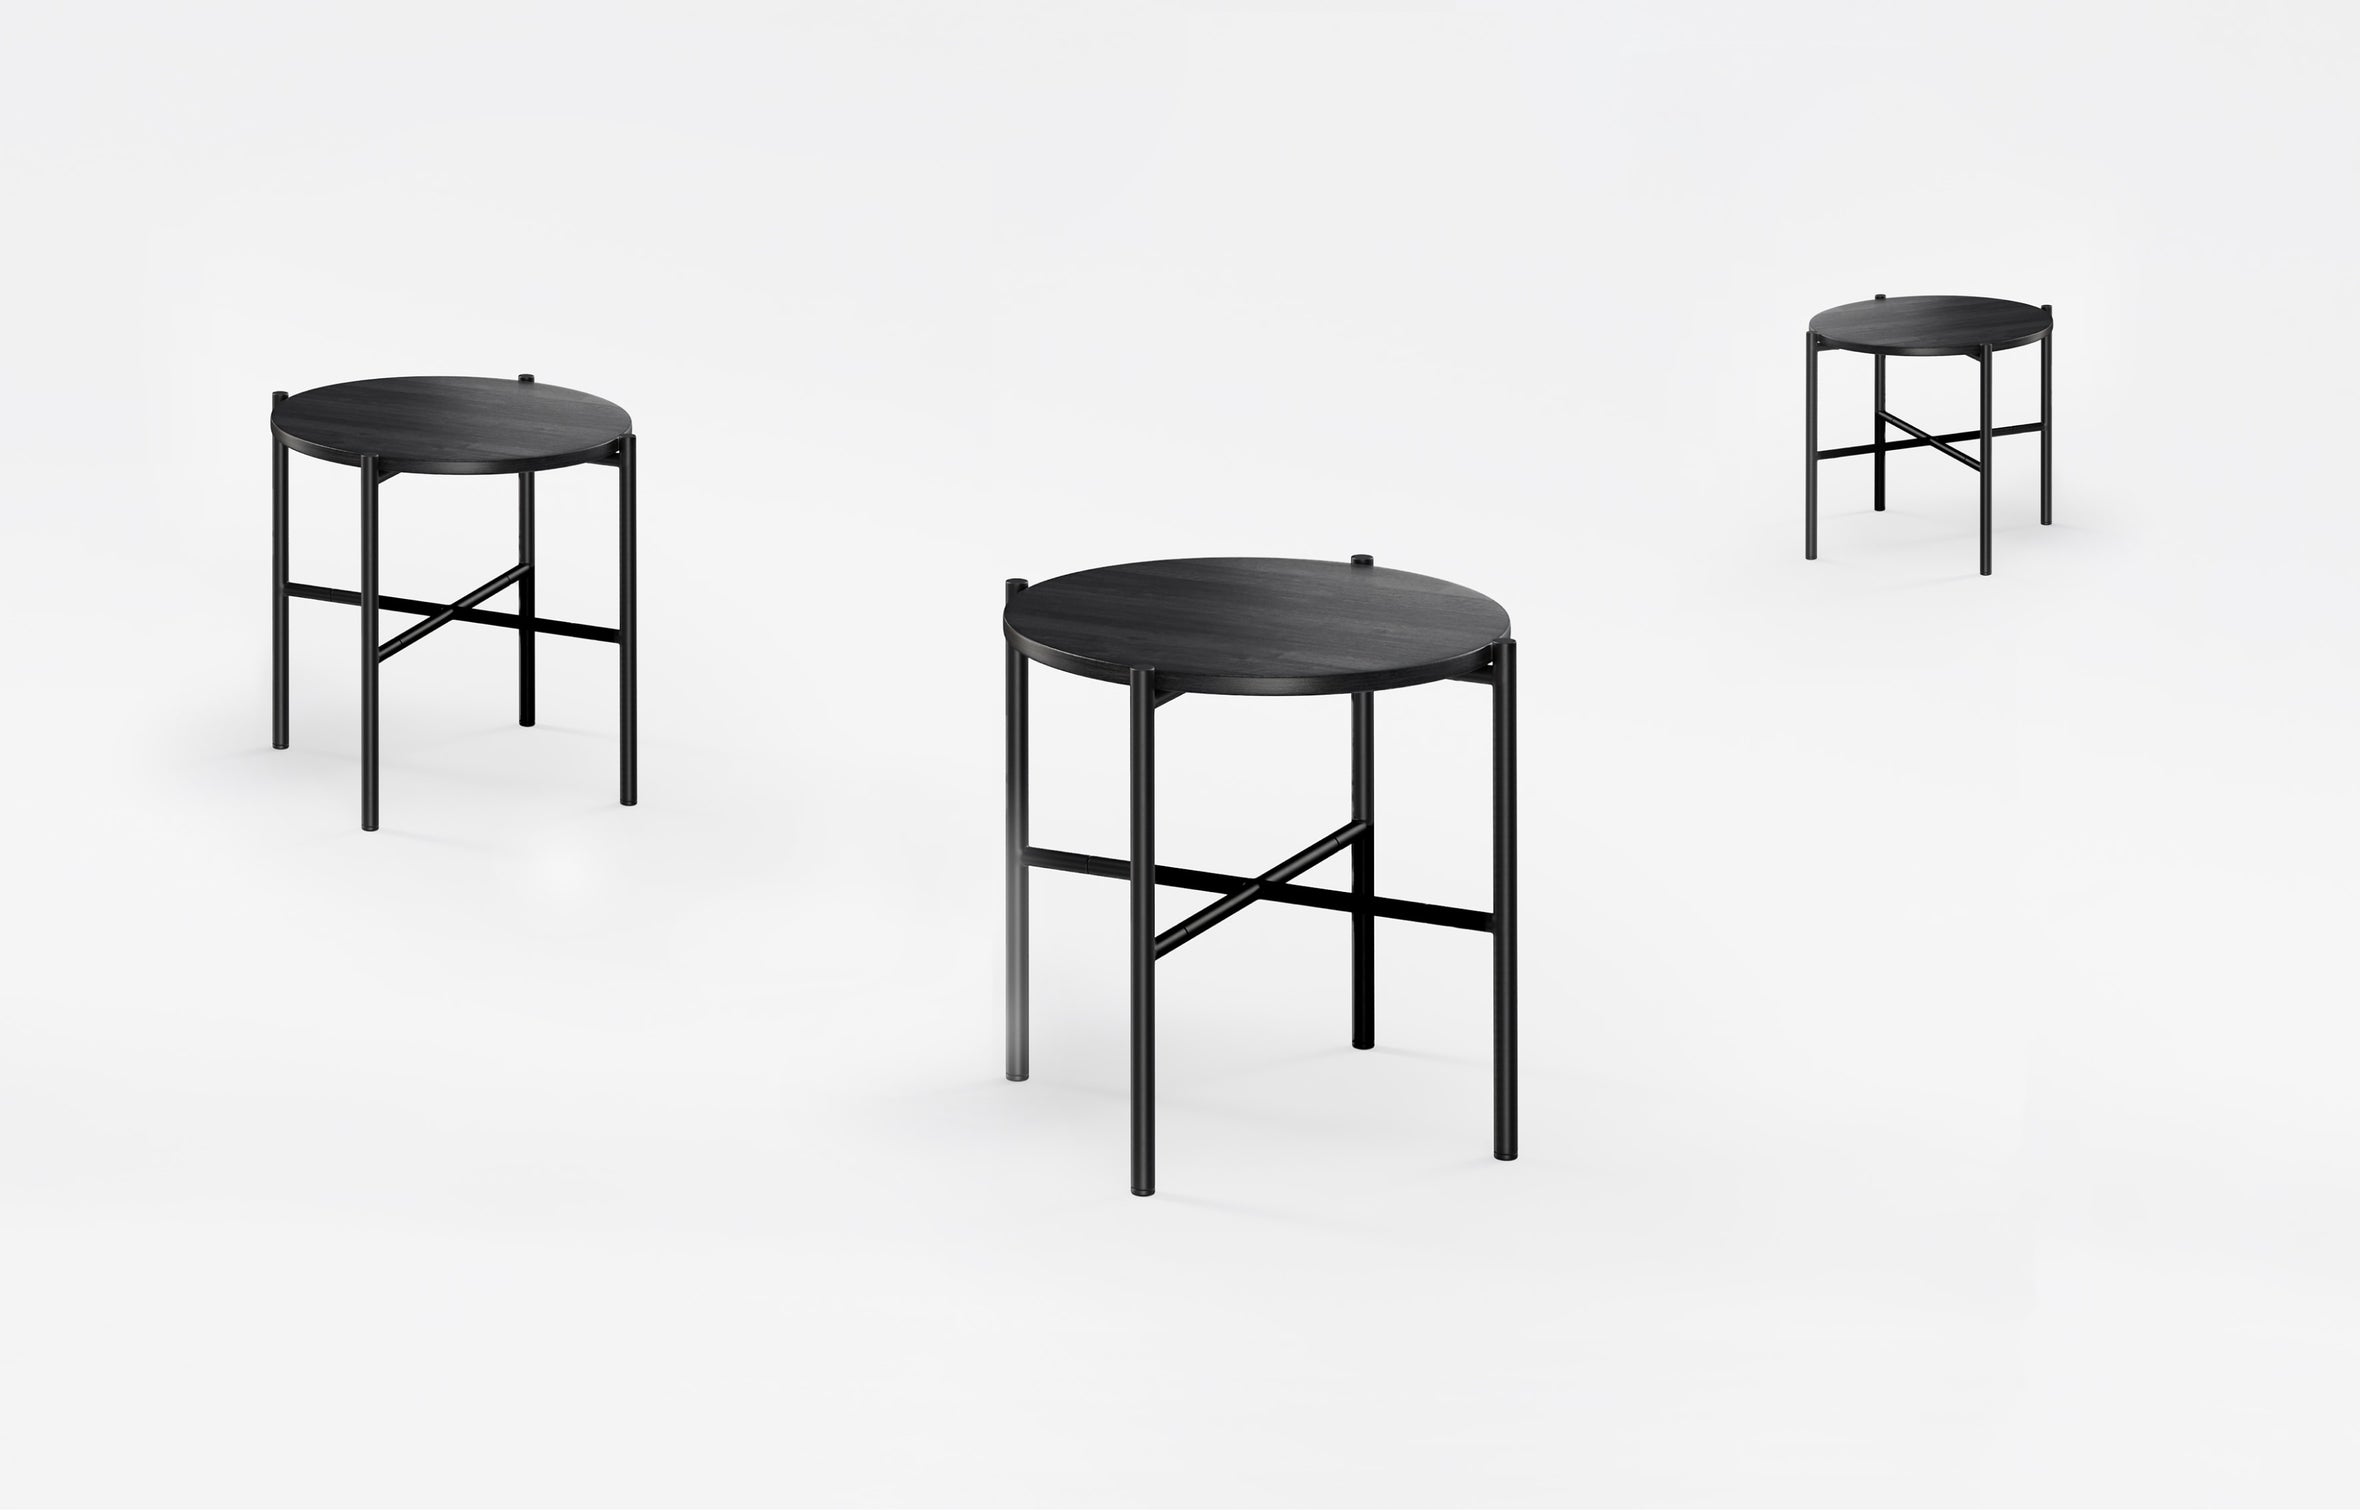 Moon side tables | ff&e dorm furniture manufacturers | Roomy | Chicago